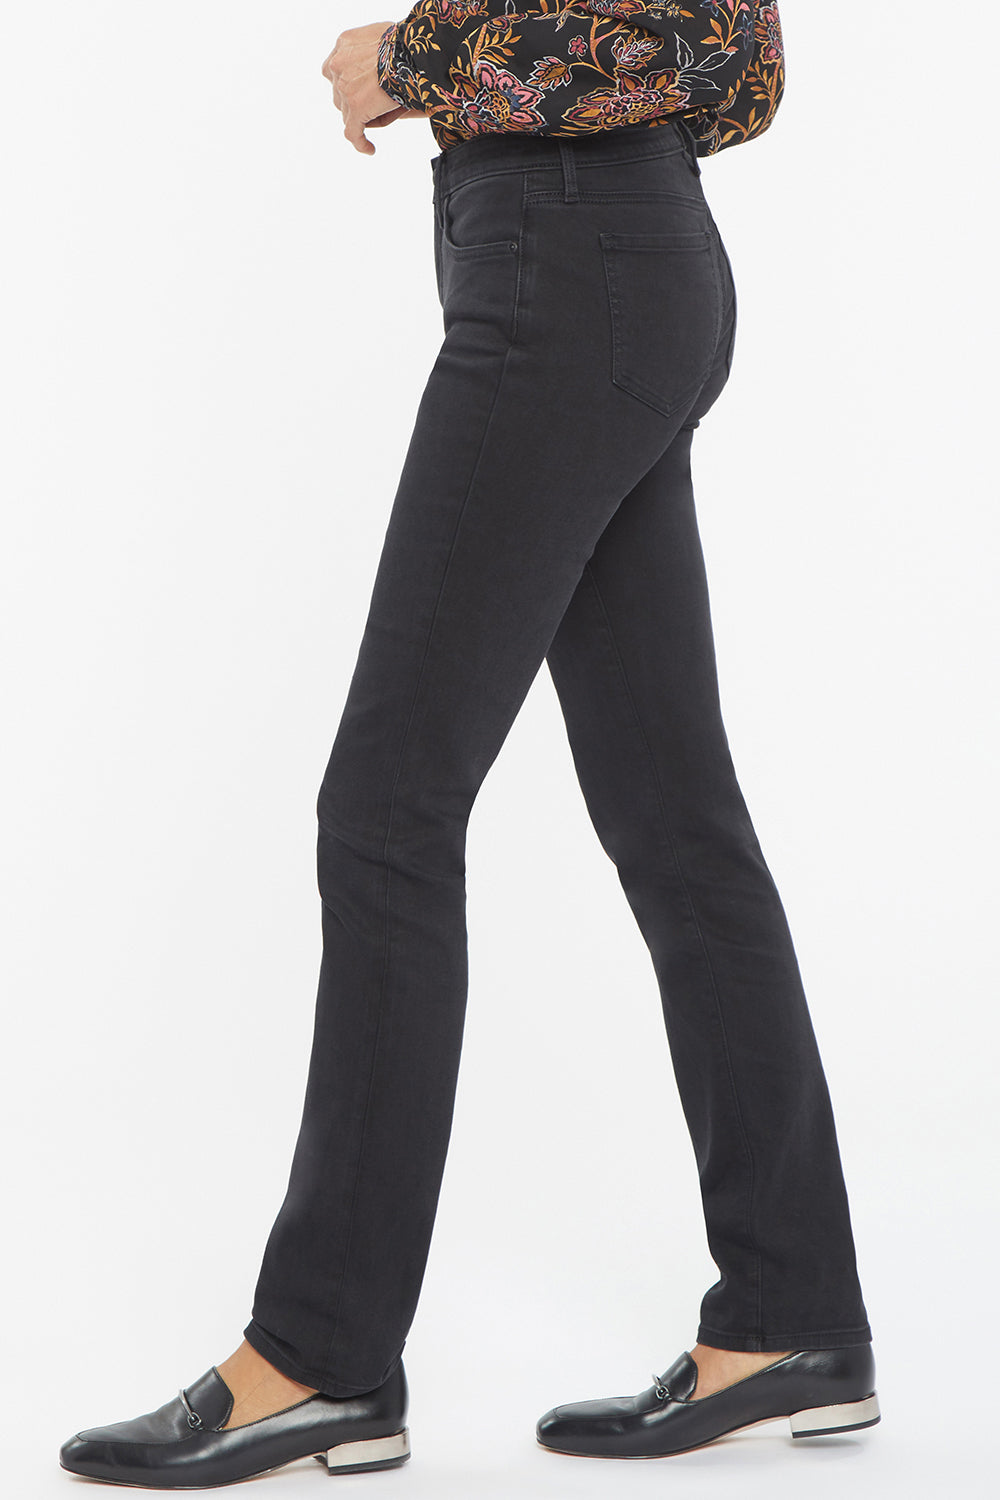 NYDJ Sheri Slim Ankle Jeans In Petite With Roll Cuffs - Trinity